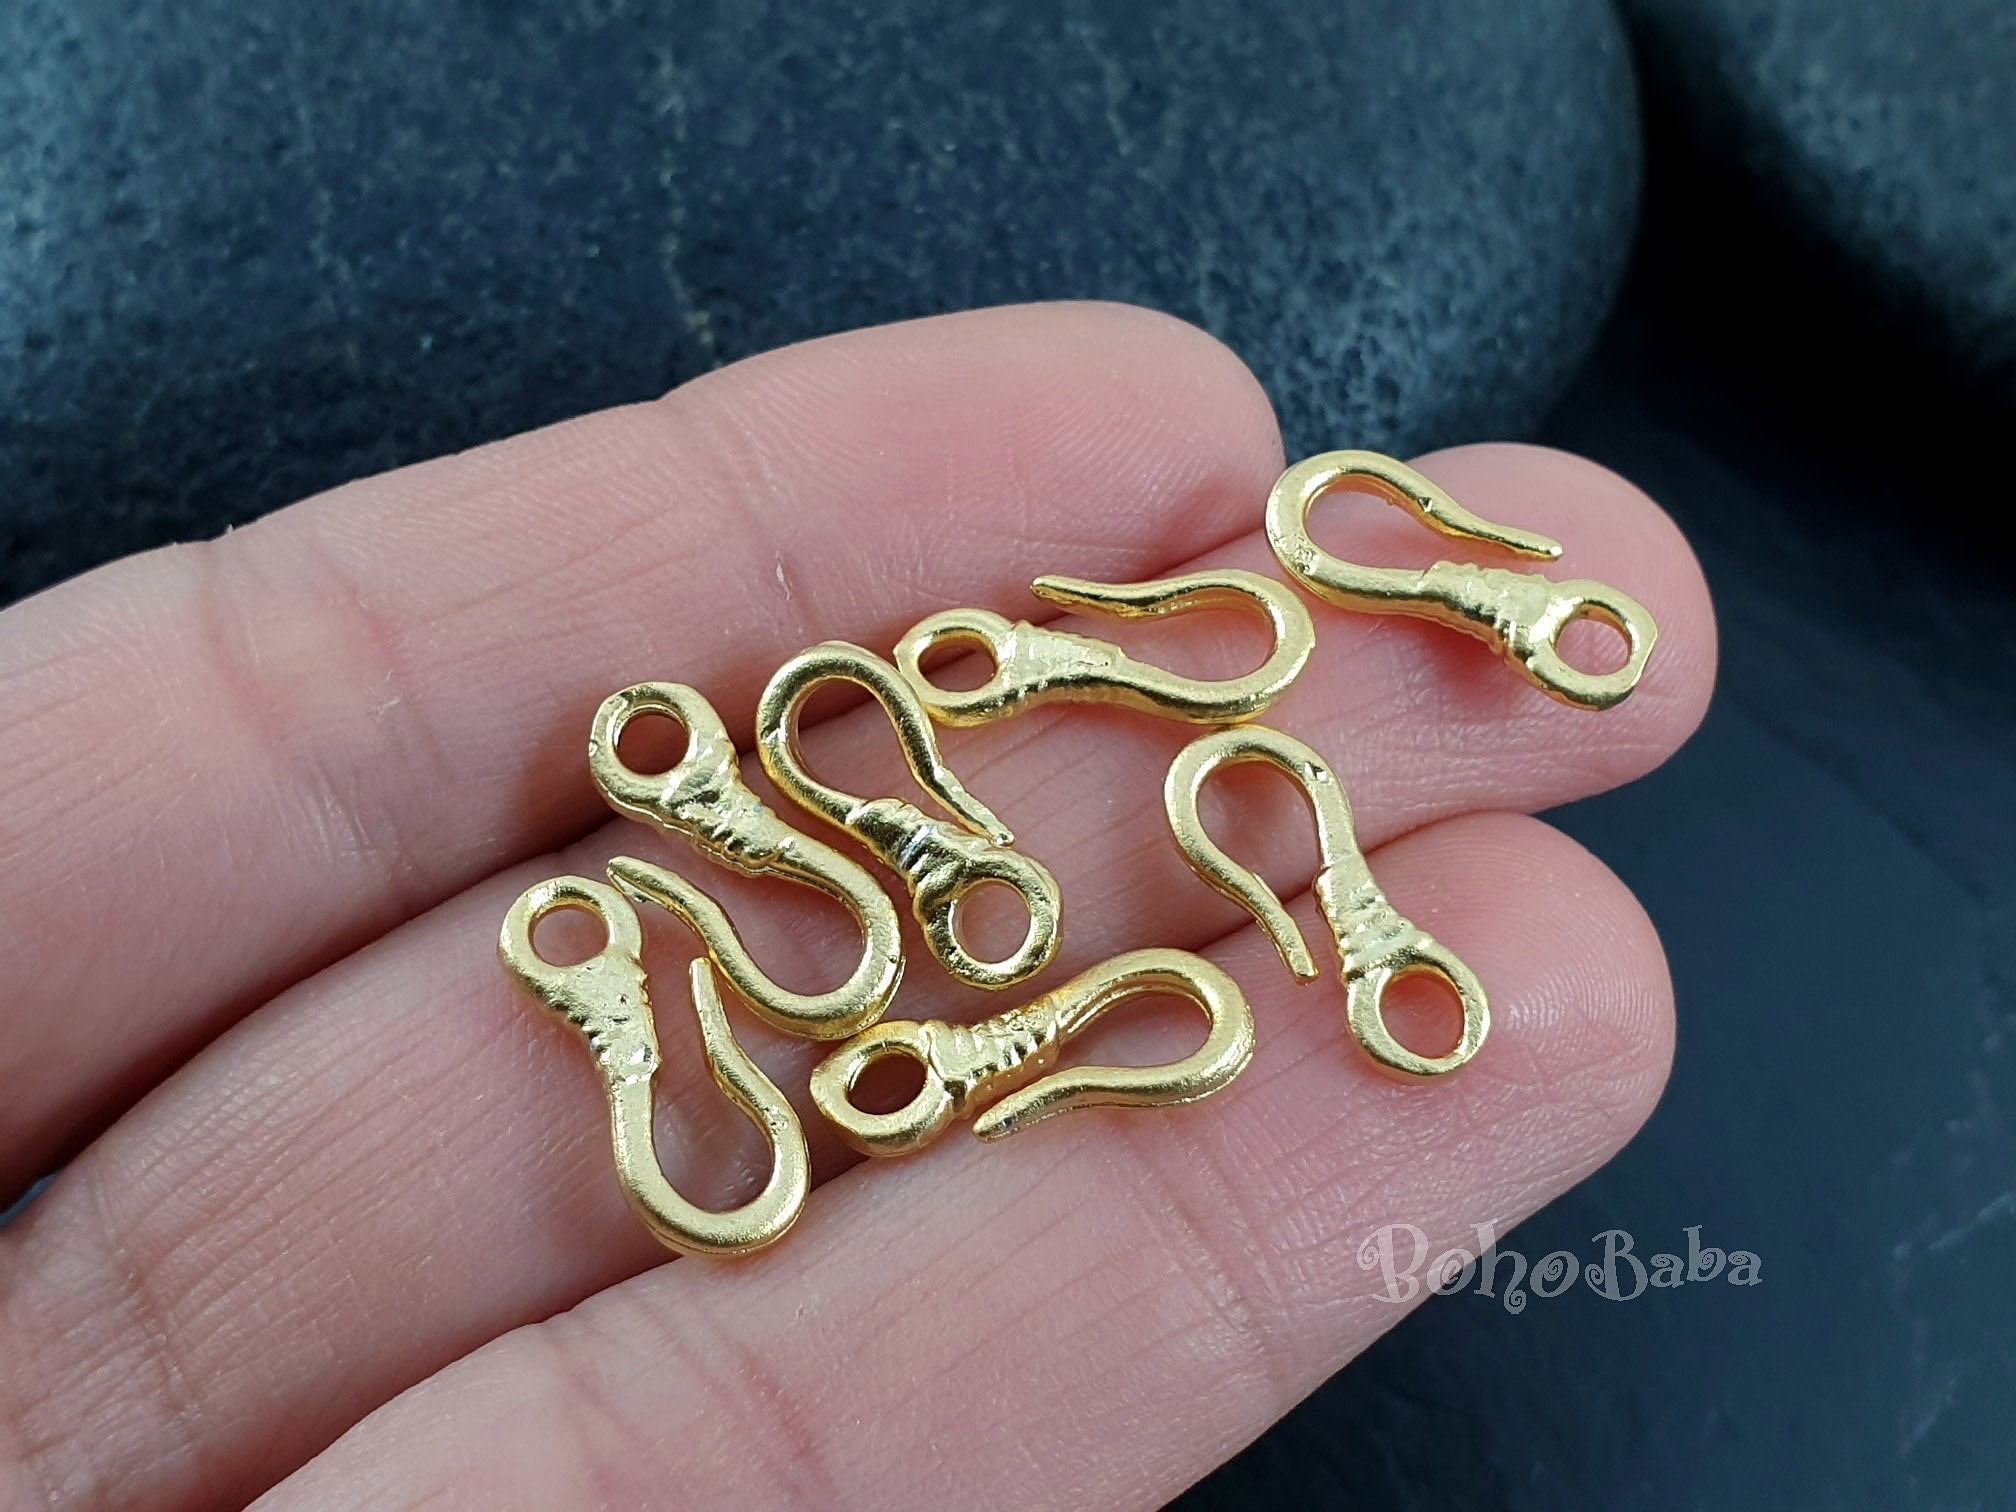 1pc Classic Simple Golden Chain Clasp DIY Jewelry Making Accessories  Necklace Bracelet Art Craft Handmade Material